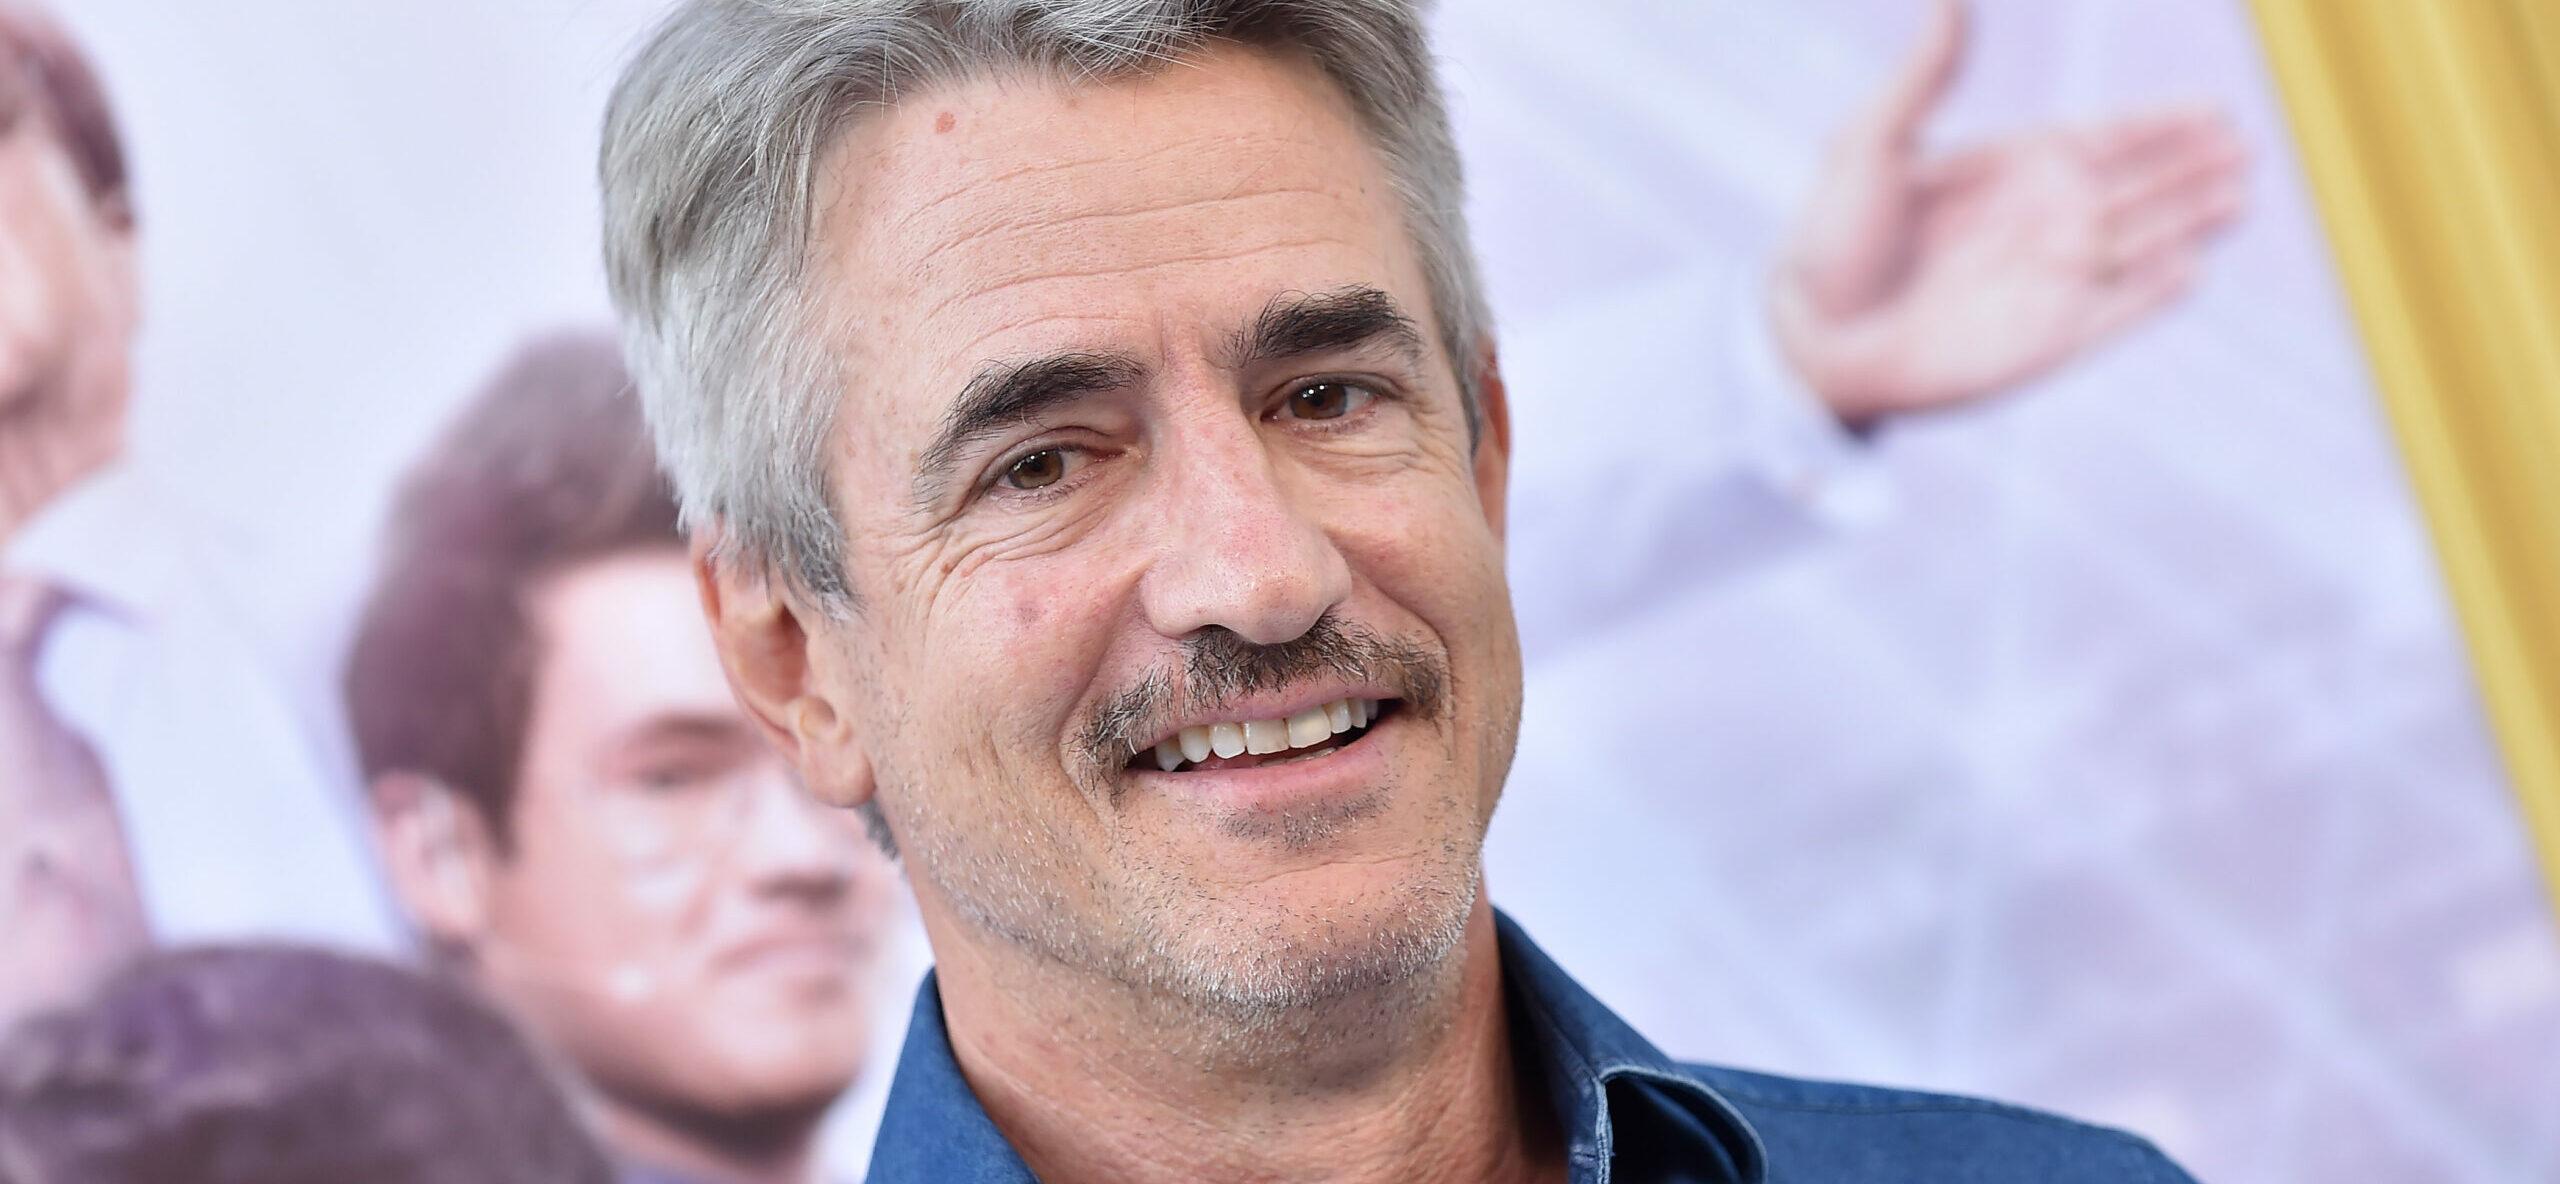 Dermot Mulroney at the 'The Righteous Gemstones' Los Angeles Premiere